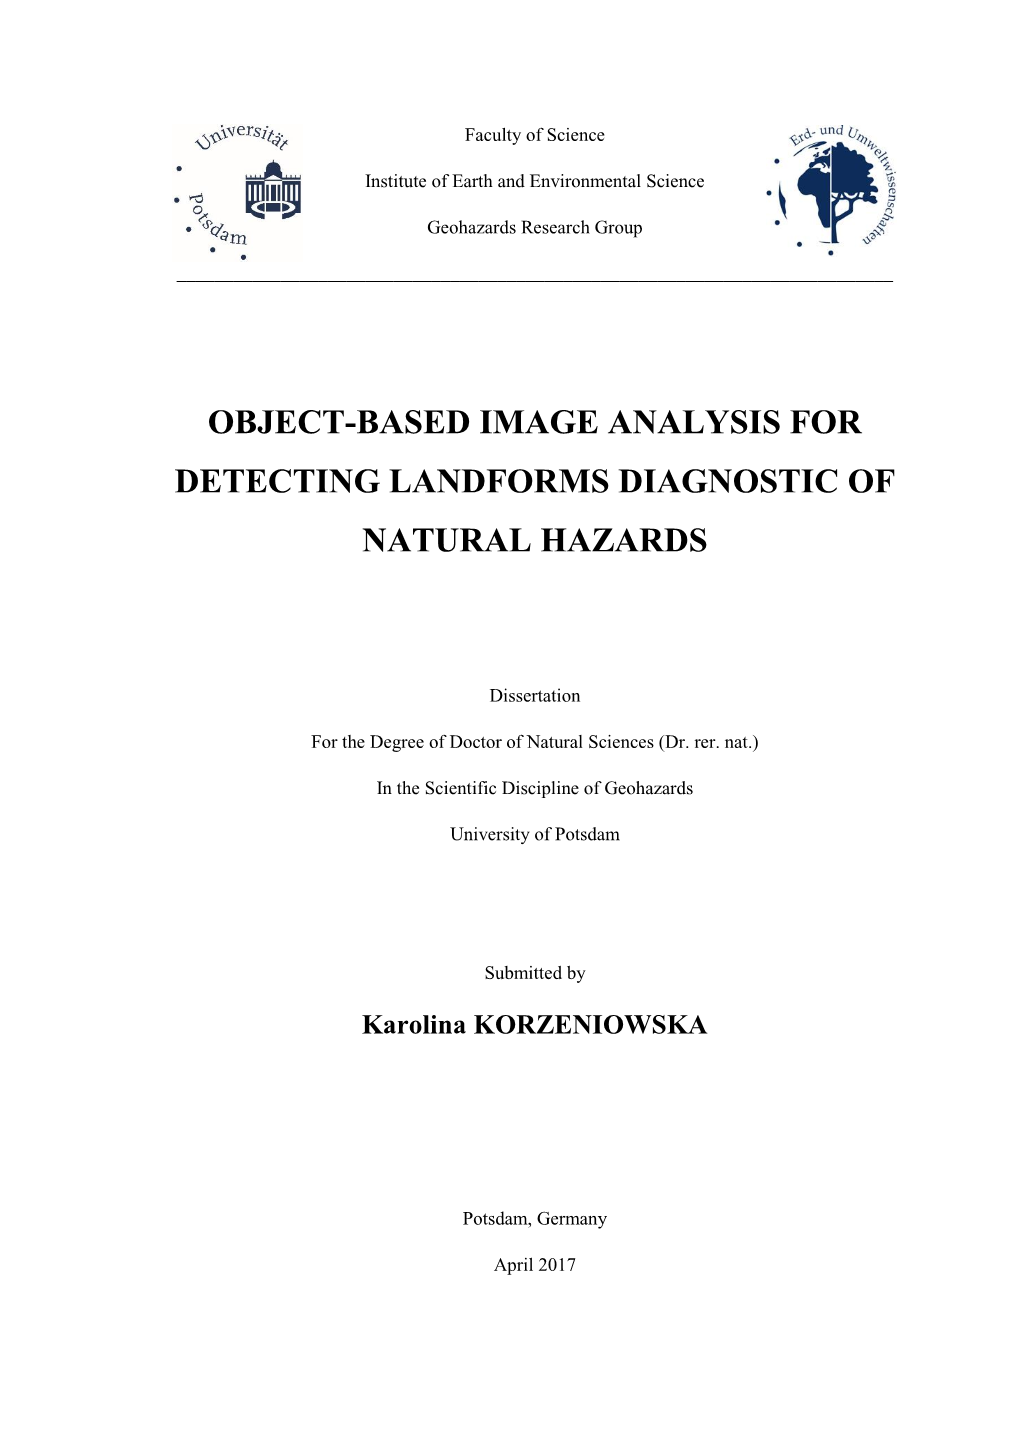 Object-Based Image Analysis for Detecting Landforms Diagnostic of Natural Hazards